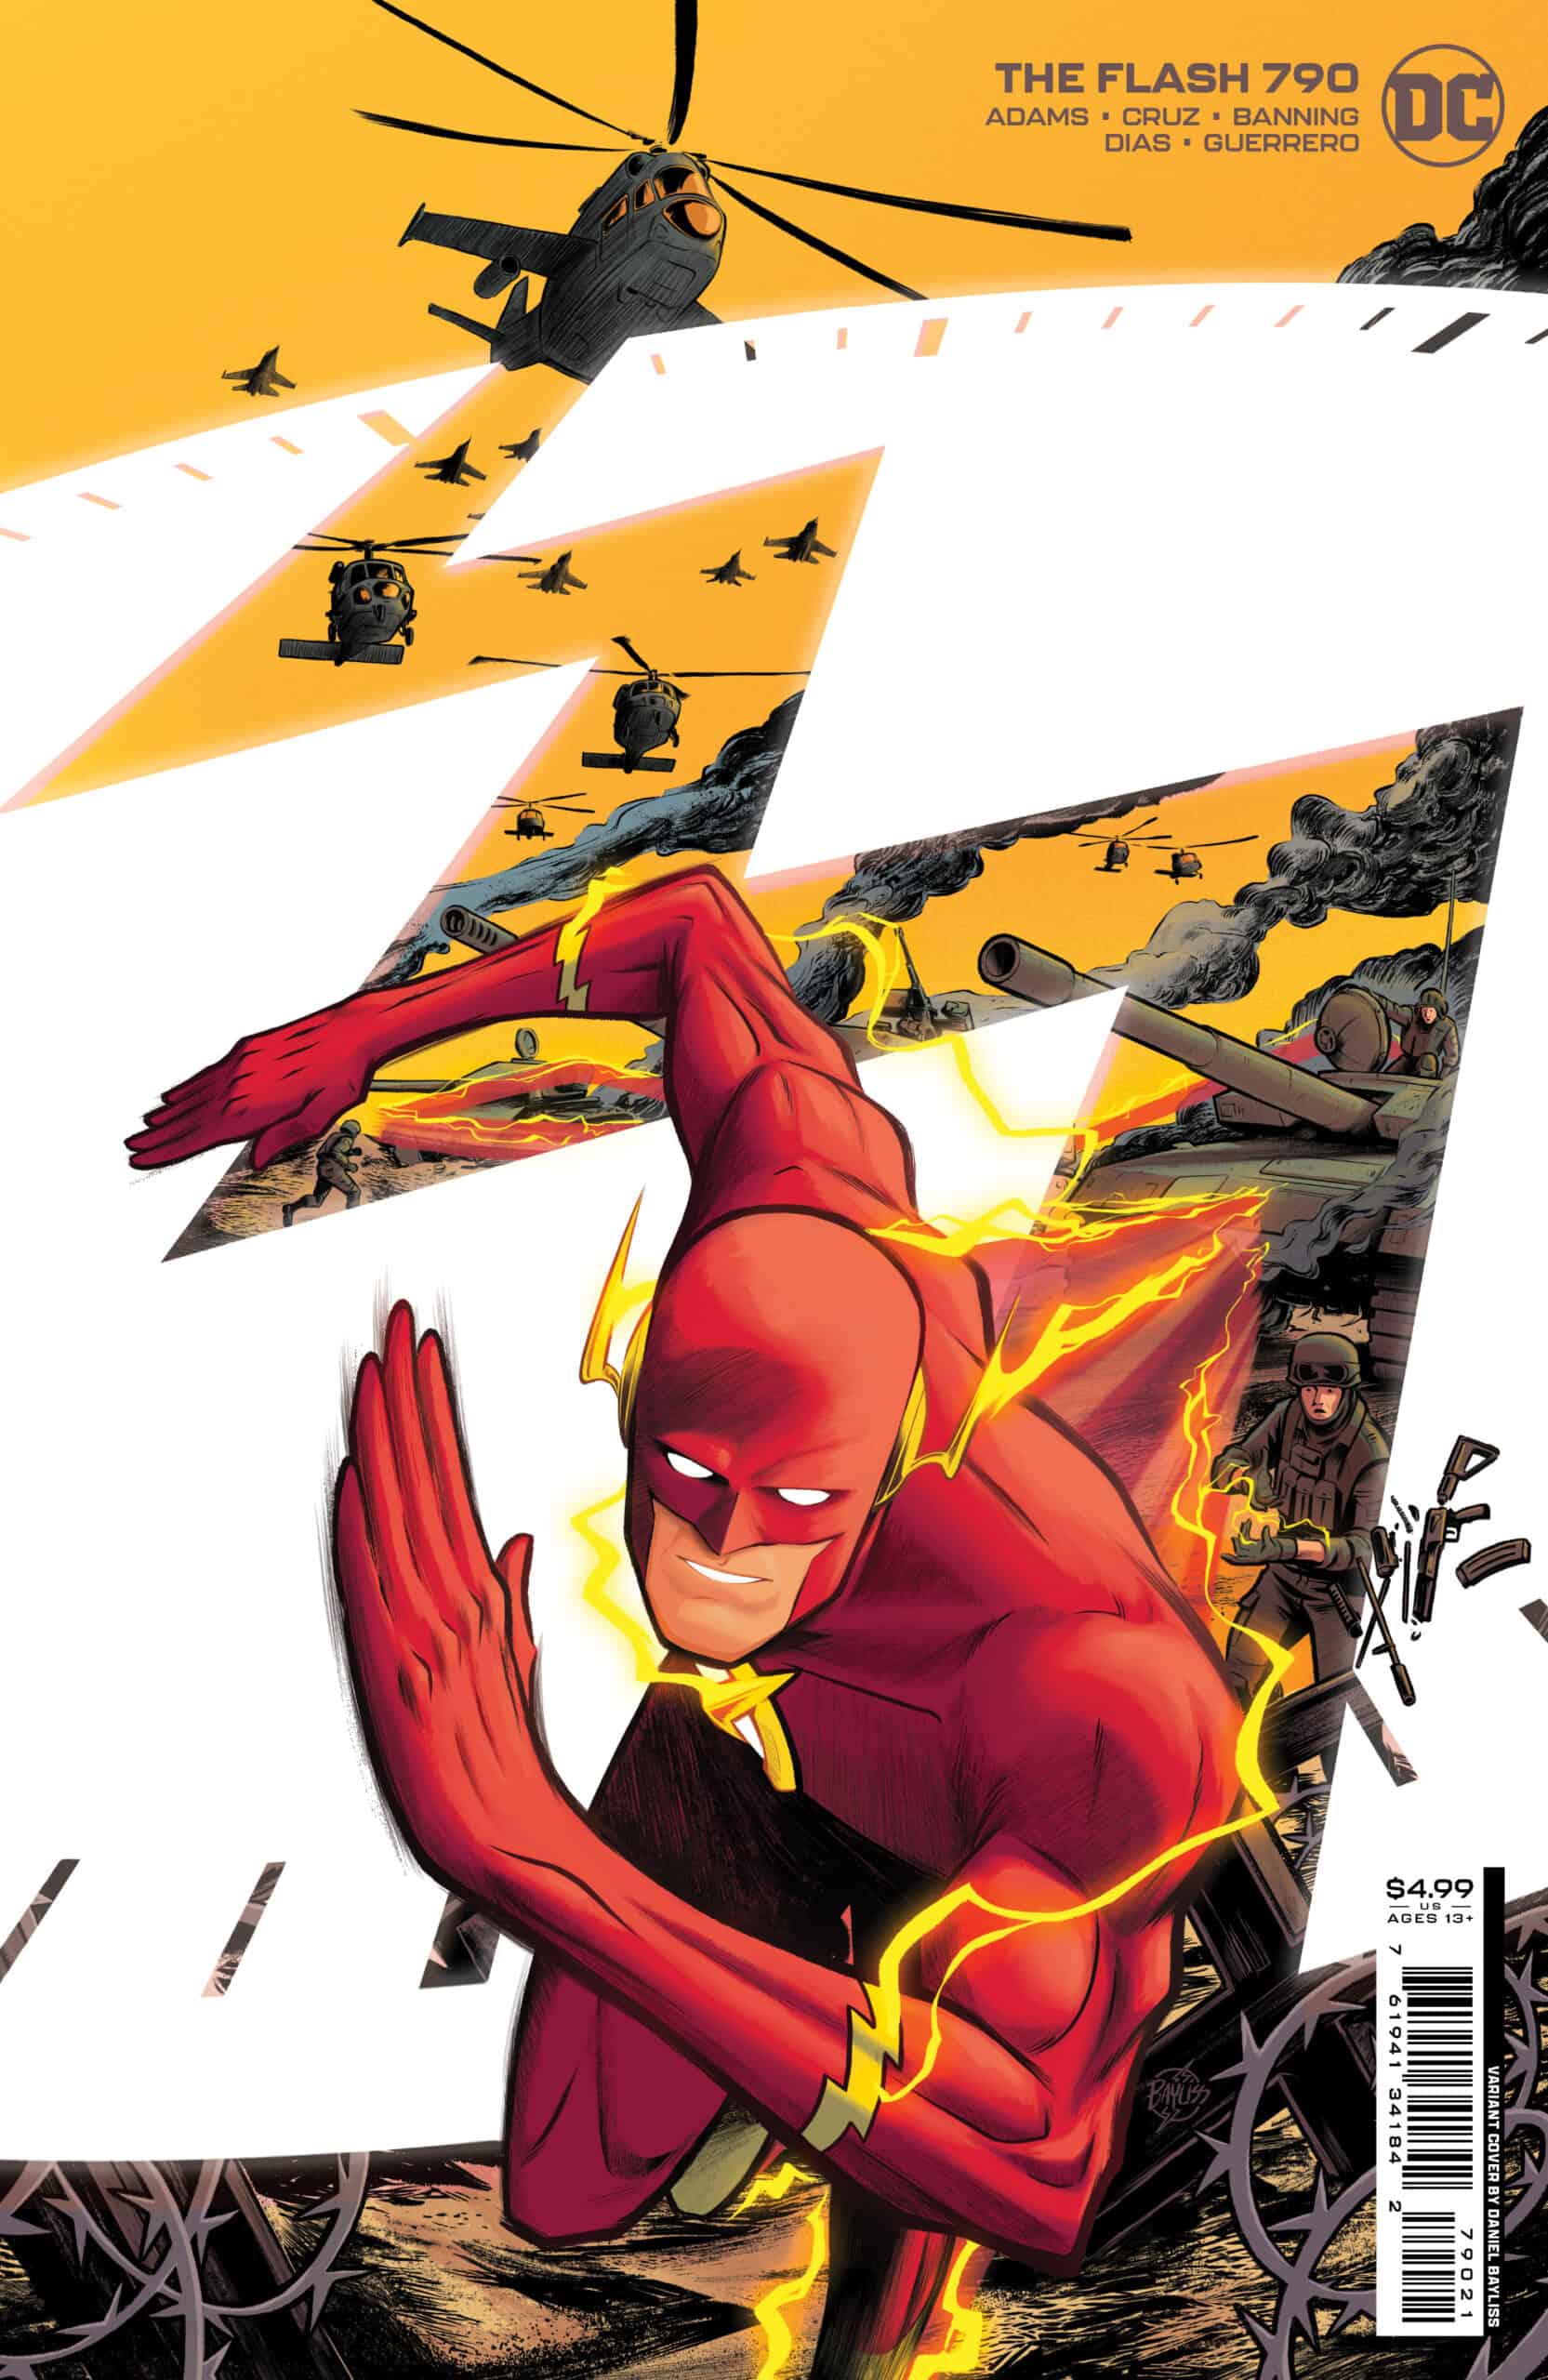 DC COMICS SNEAK PEEK for January 3, 2023: The One Minute War Takes Place In  THE FLASH #790 - Comic Watch